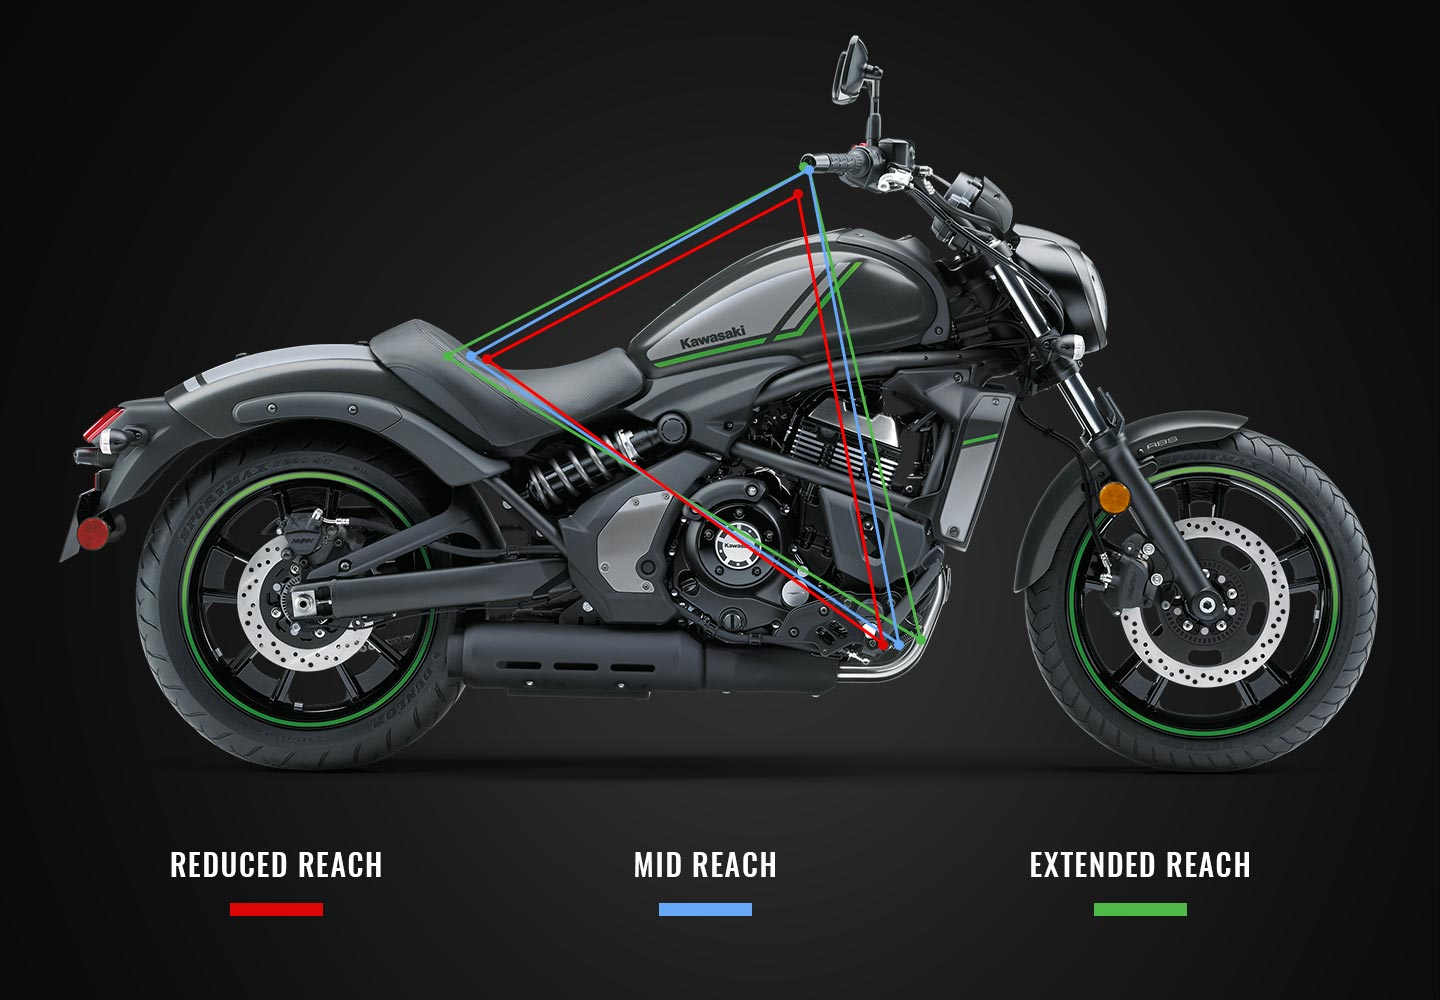 2022 Kawasaki Vulcan S revealed with new colour options  HT Auto